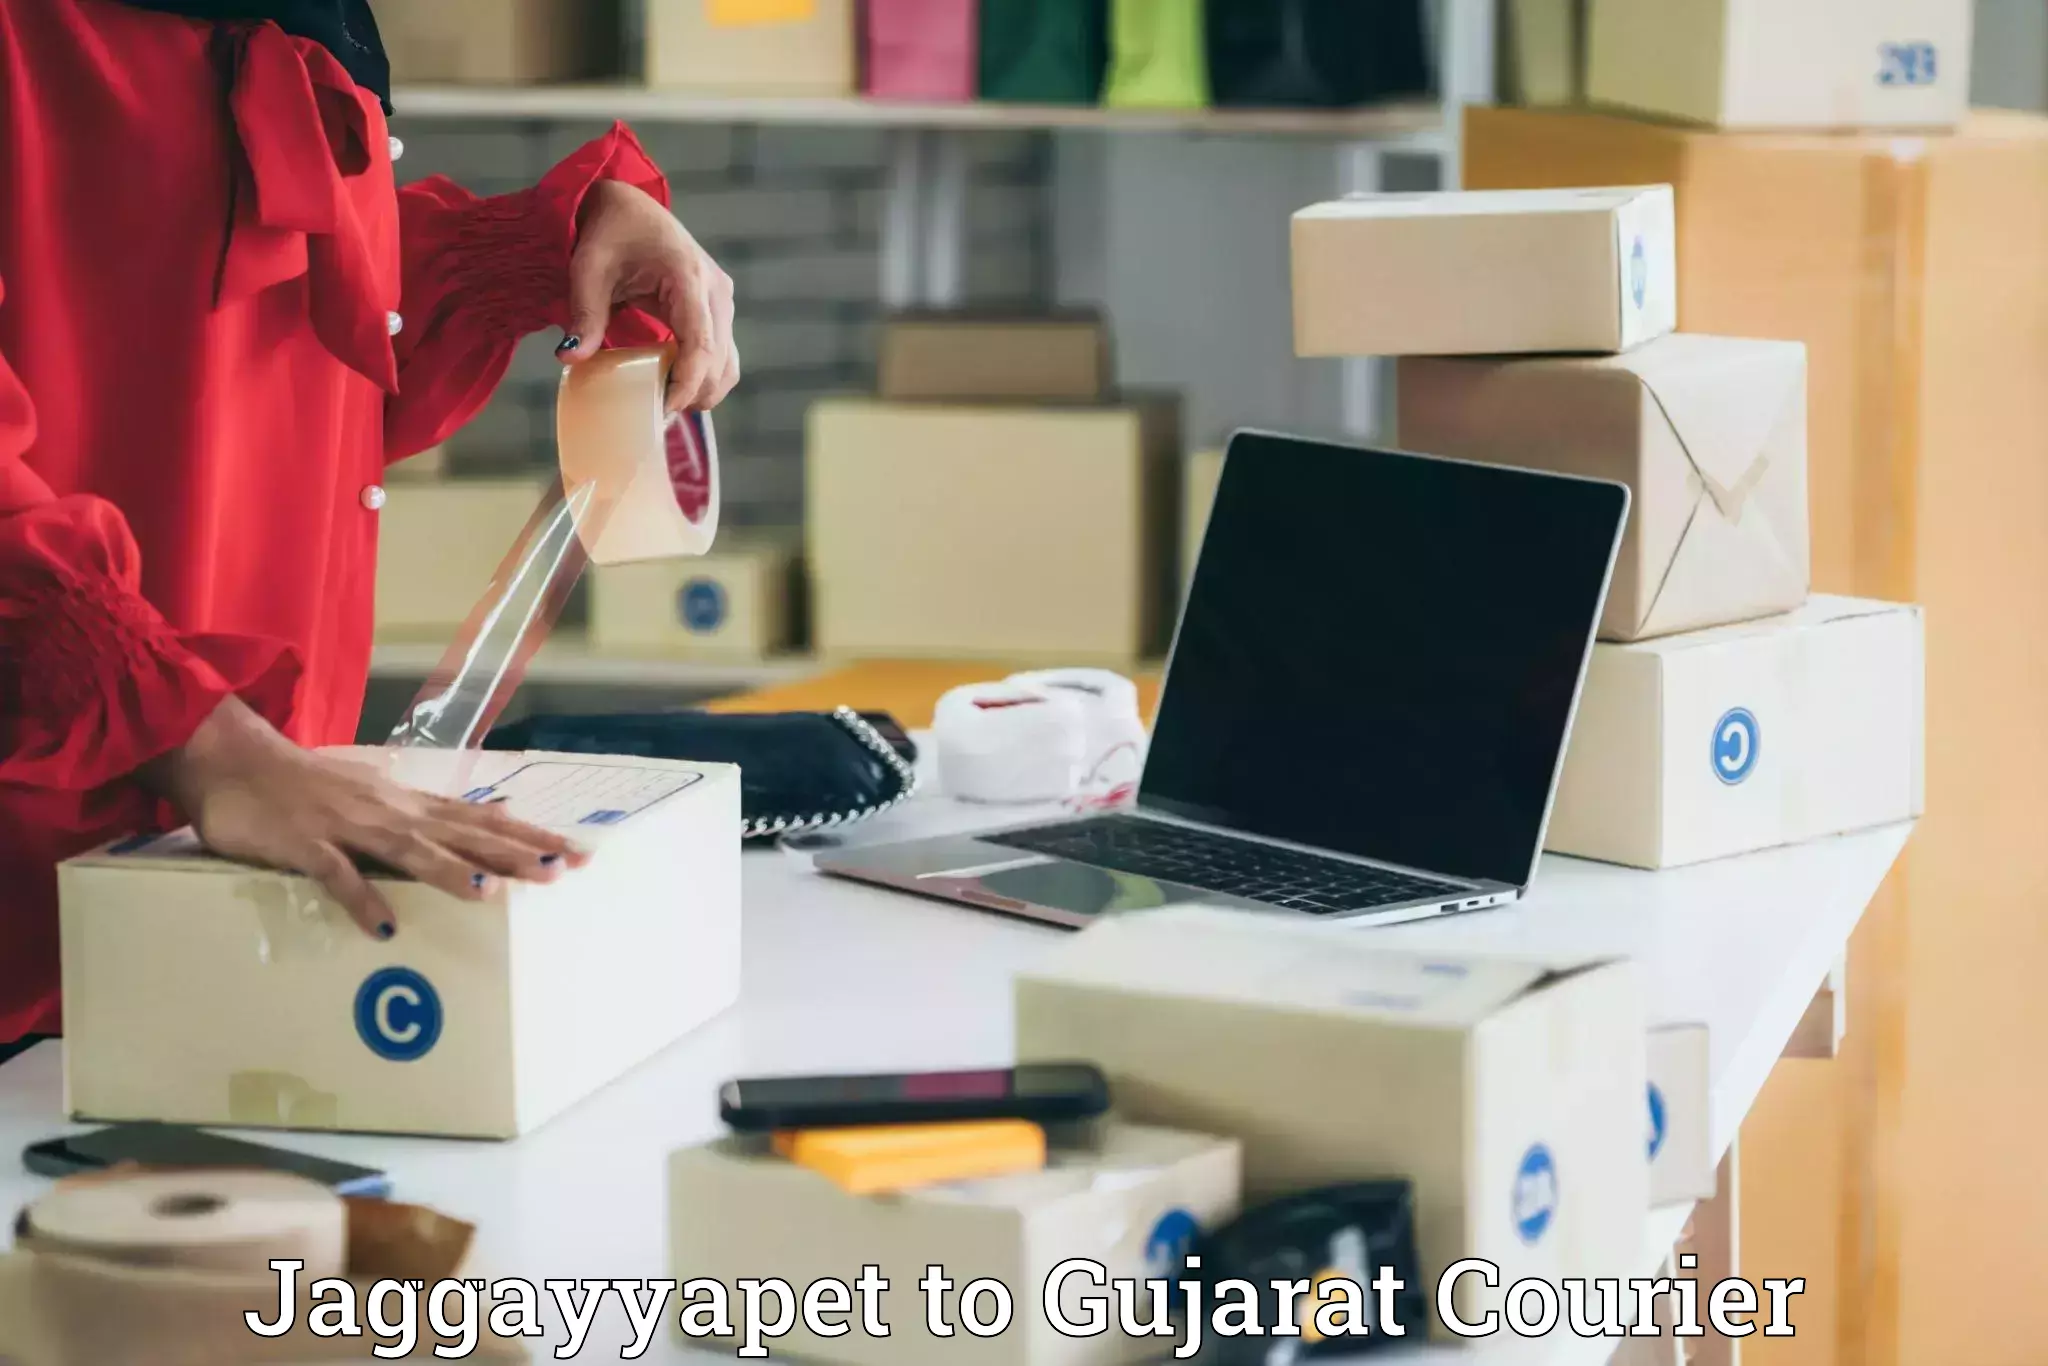 High-priority parcel service Jaggayyapet to Anand Agricultural University